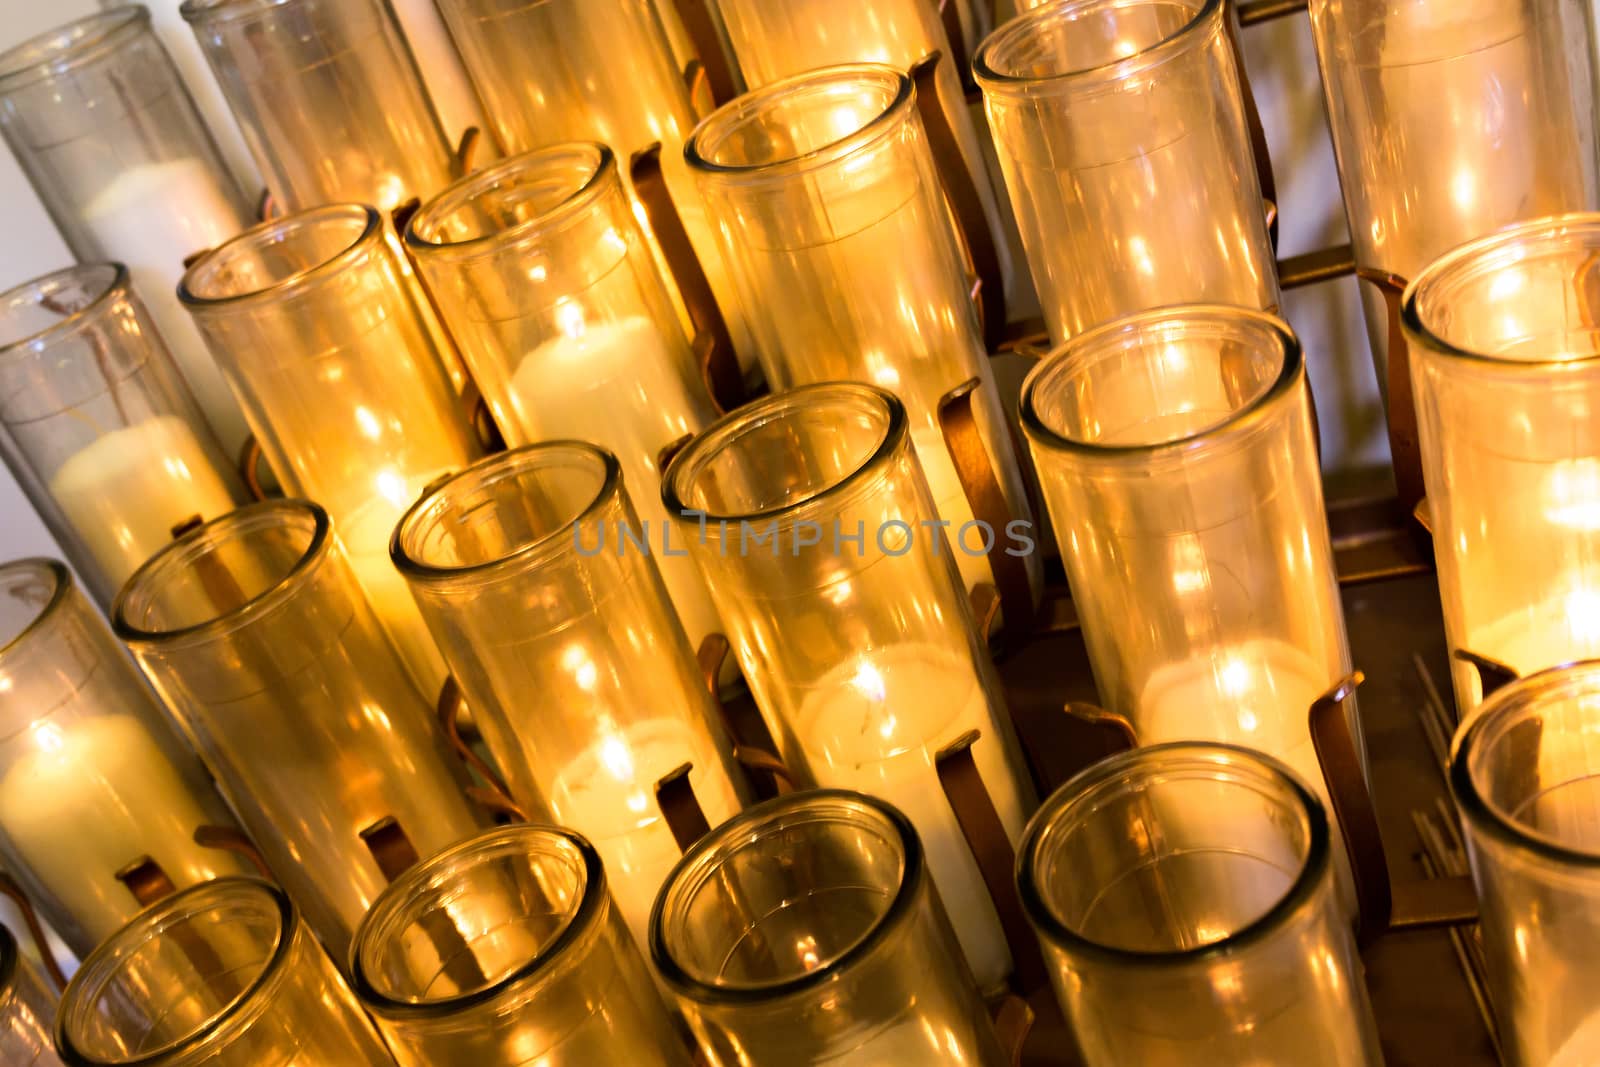 Many Votive Candles by gregorydean